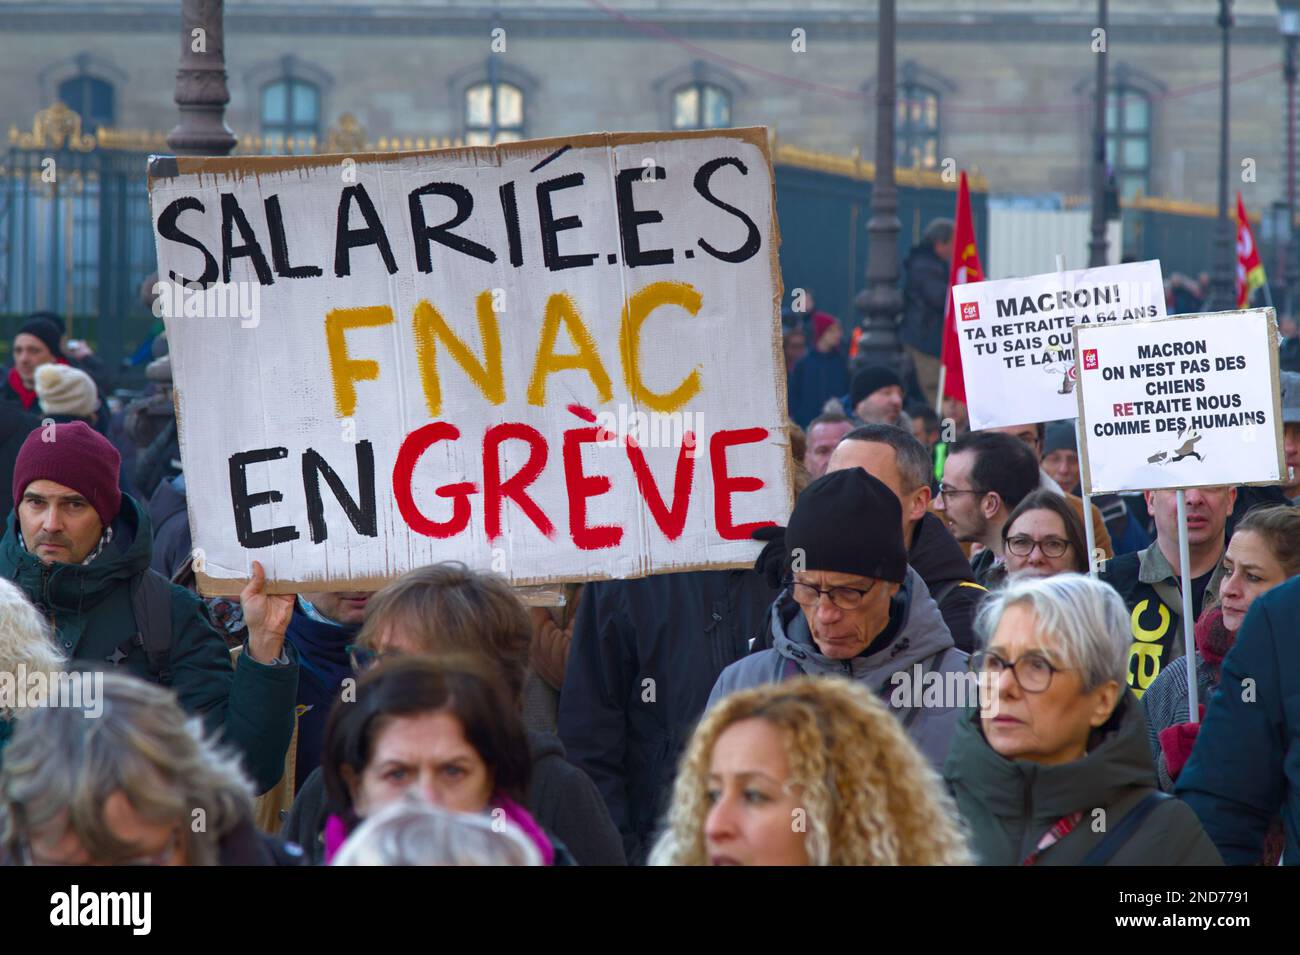 French Workers Marching In Protest Against The French Government Rasing The Retirement Age, Paris France, 7th Feb 2023 Stock Photo